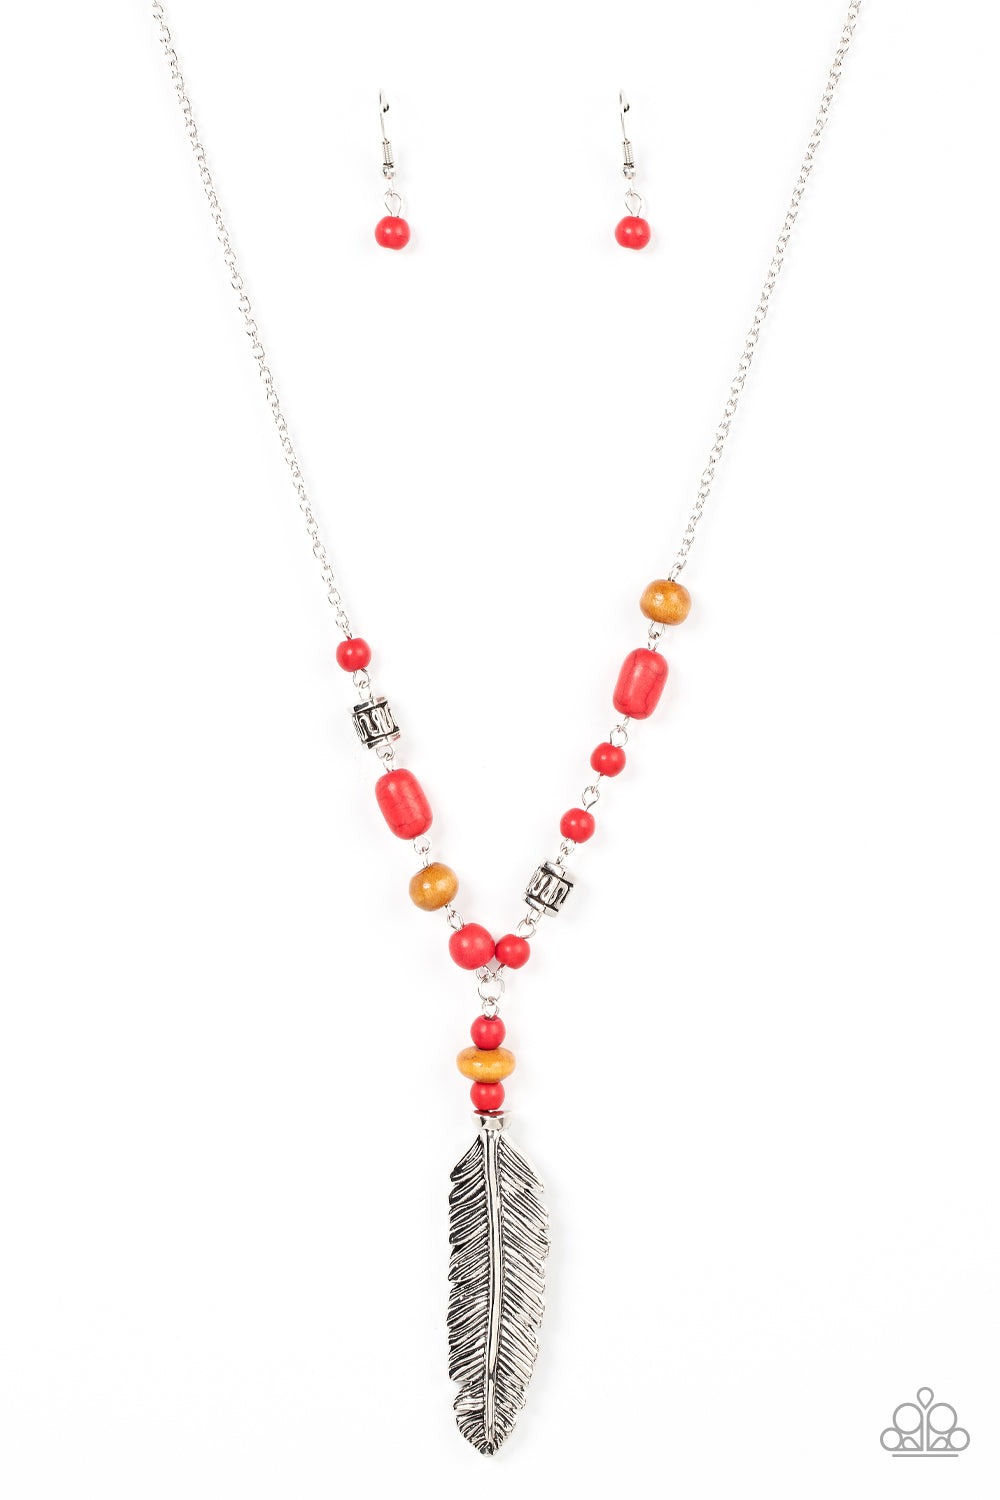 Watch Me Fly Paparazzi Accessories Necklace with Earrings - Red